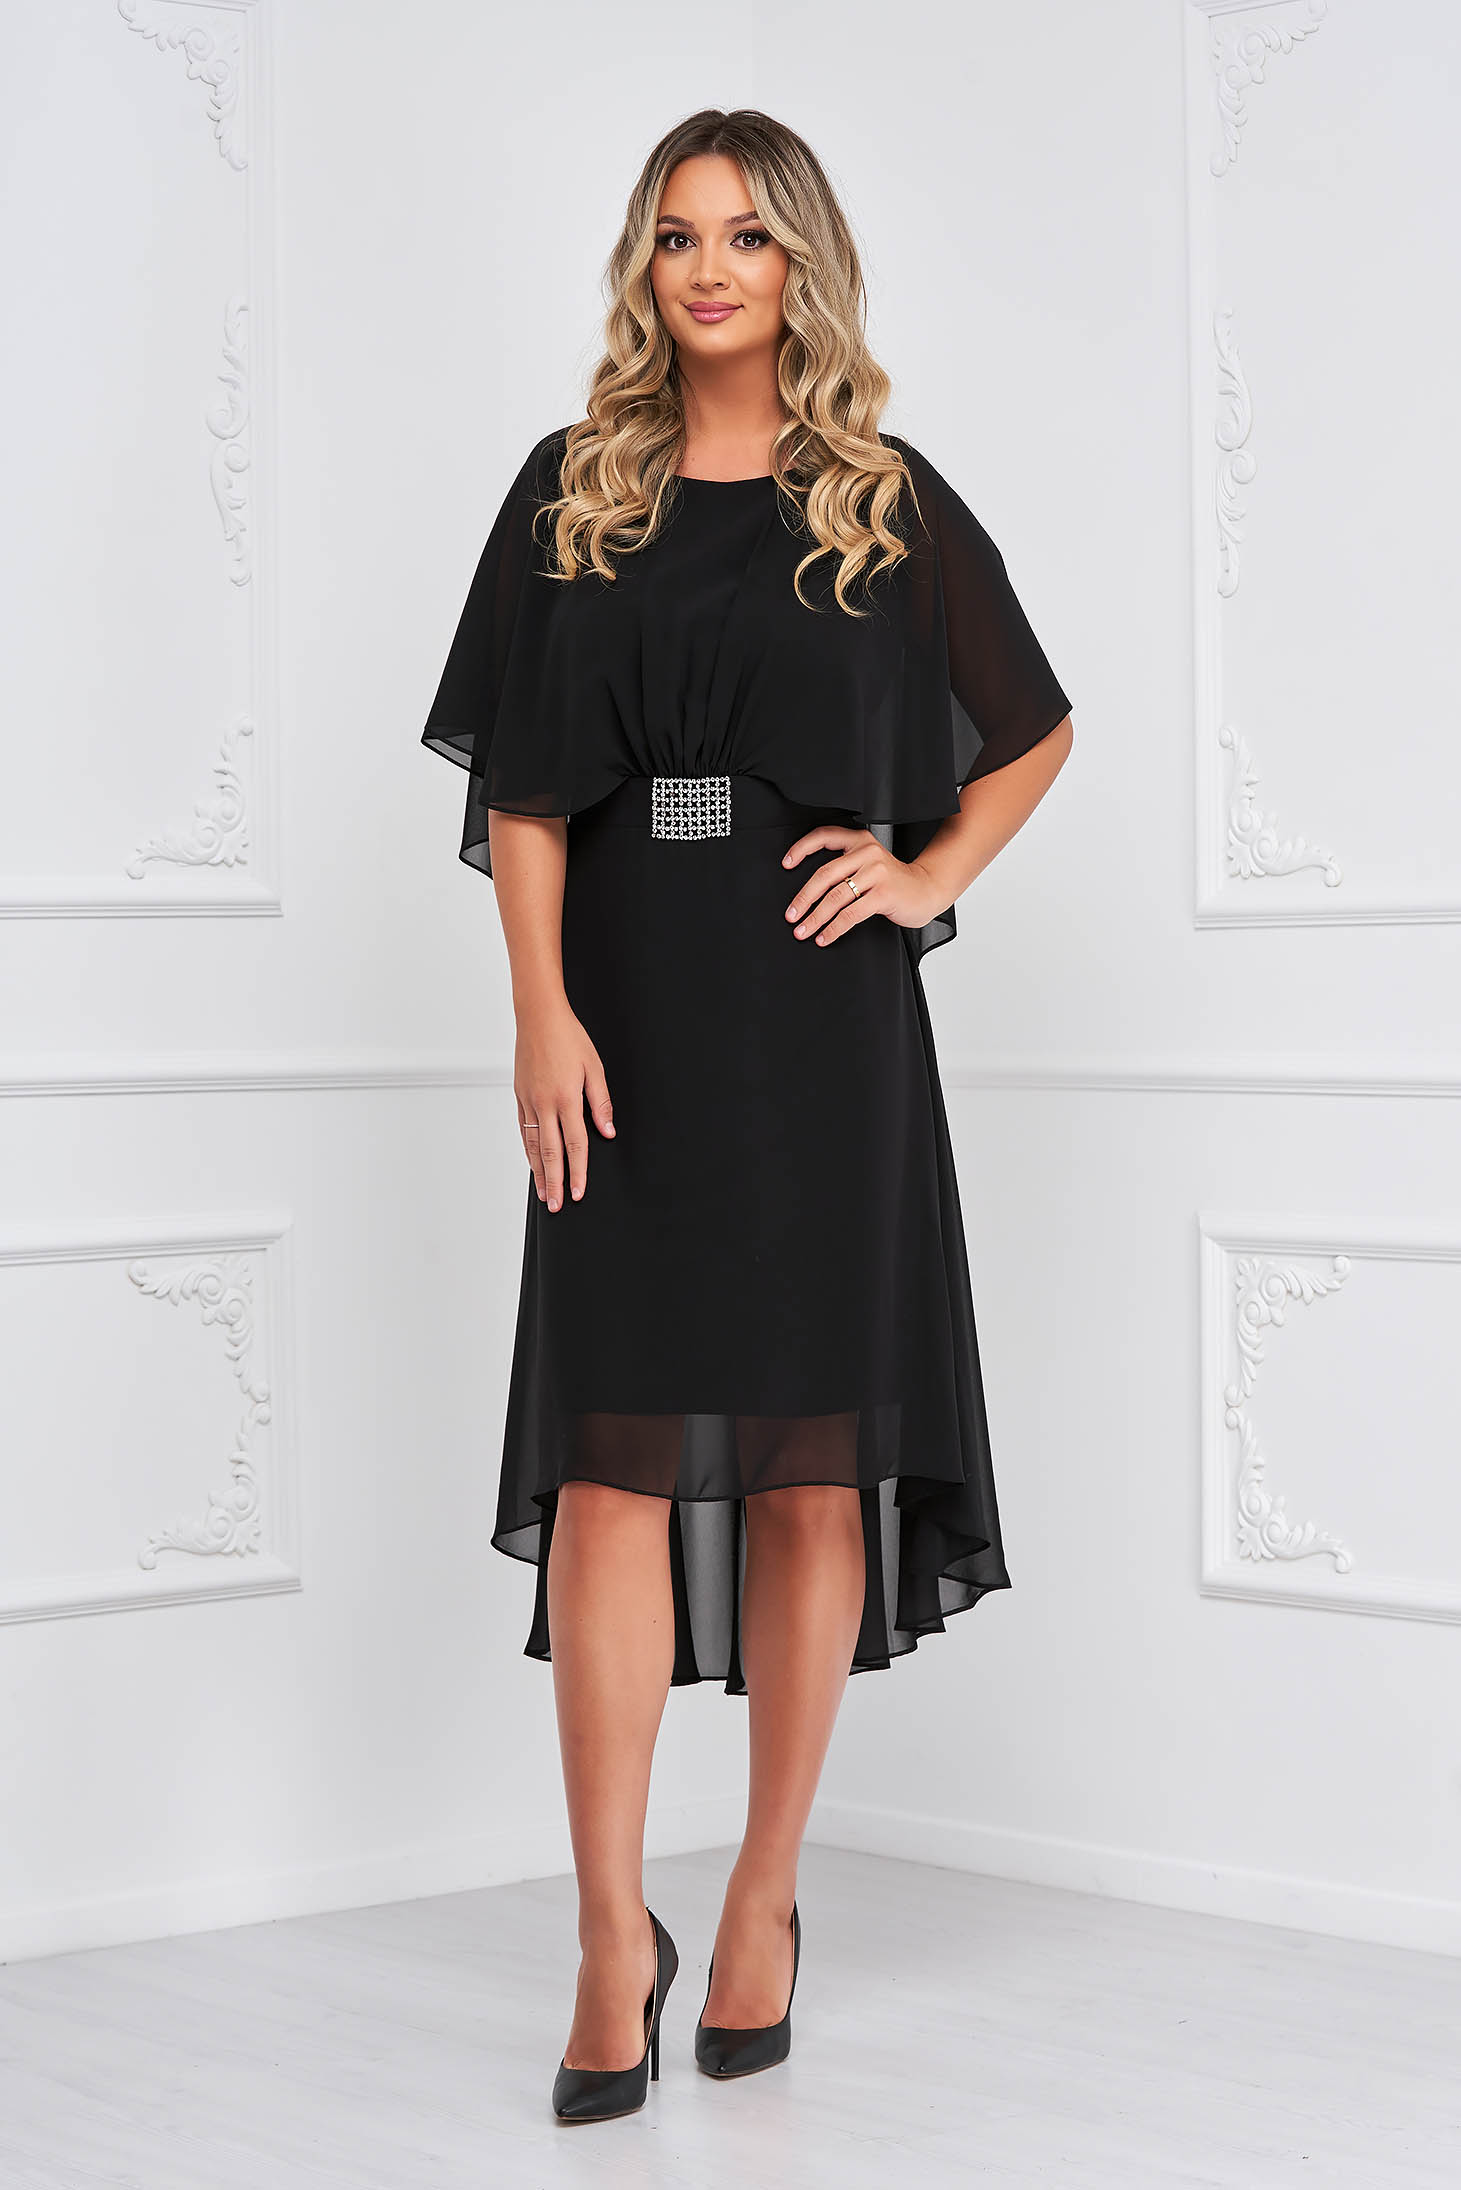 Black dress from veil fabric midi asymmetrical cloche with butterfly sleeves